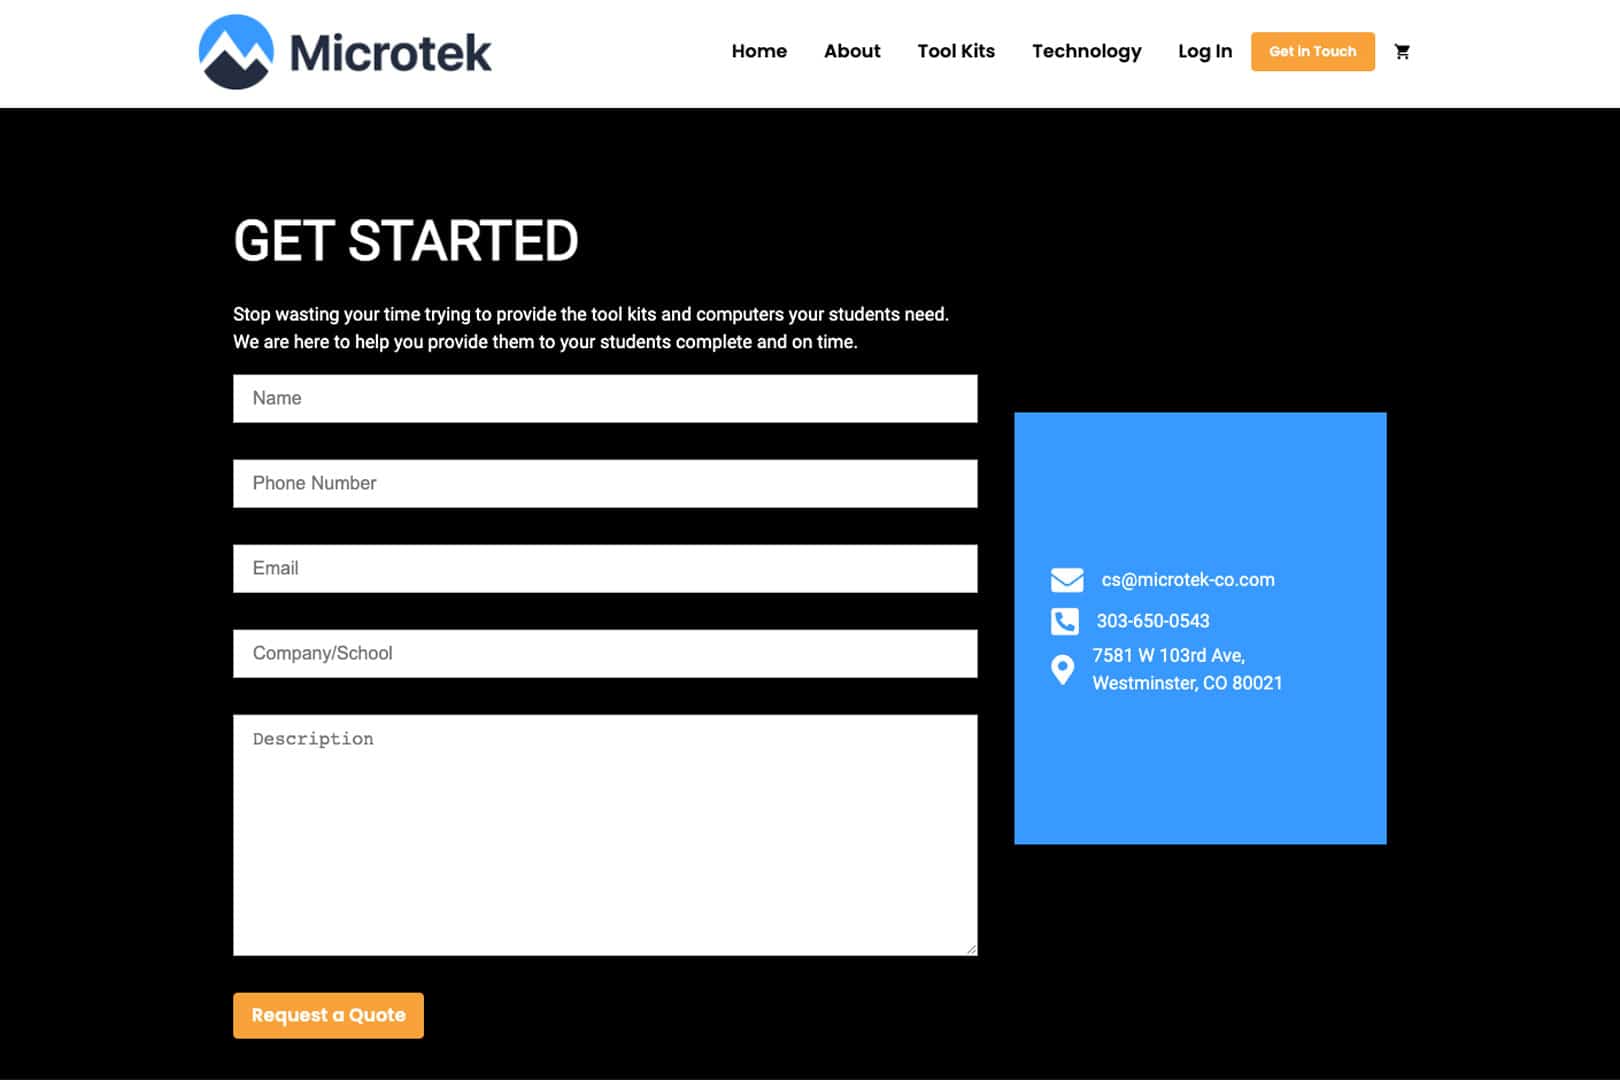 Microtek get started contact form